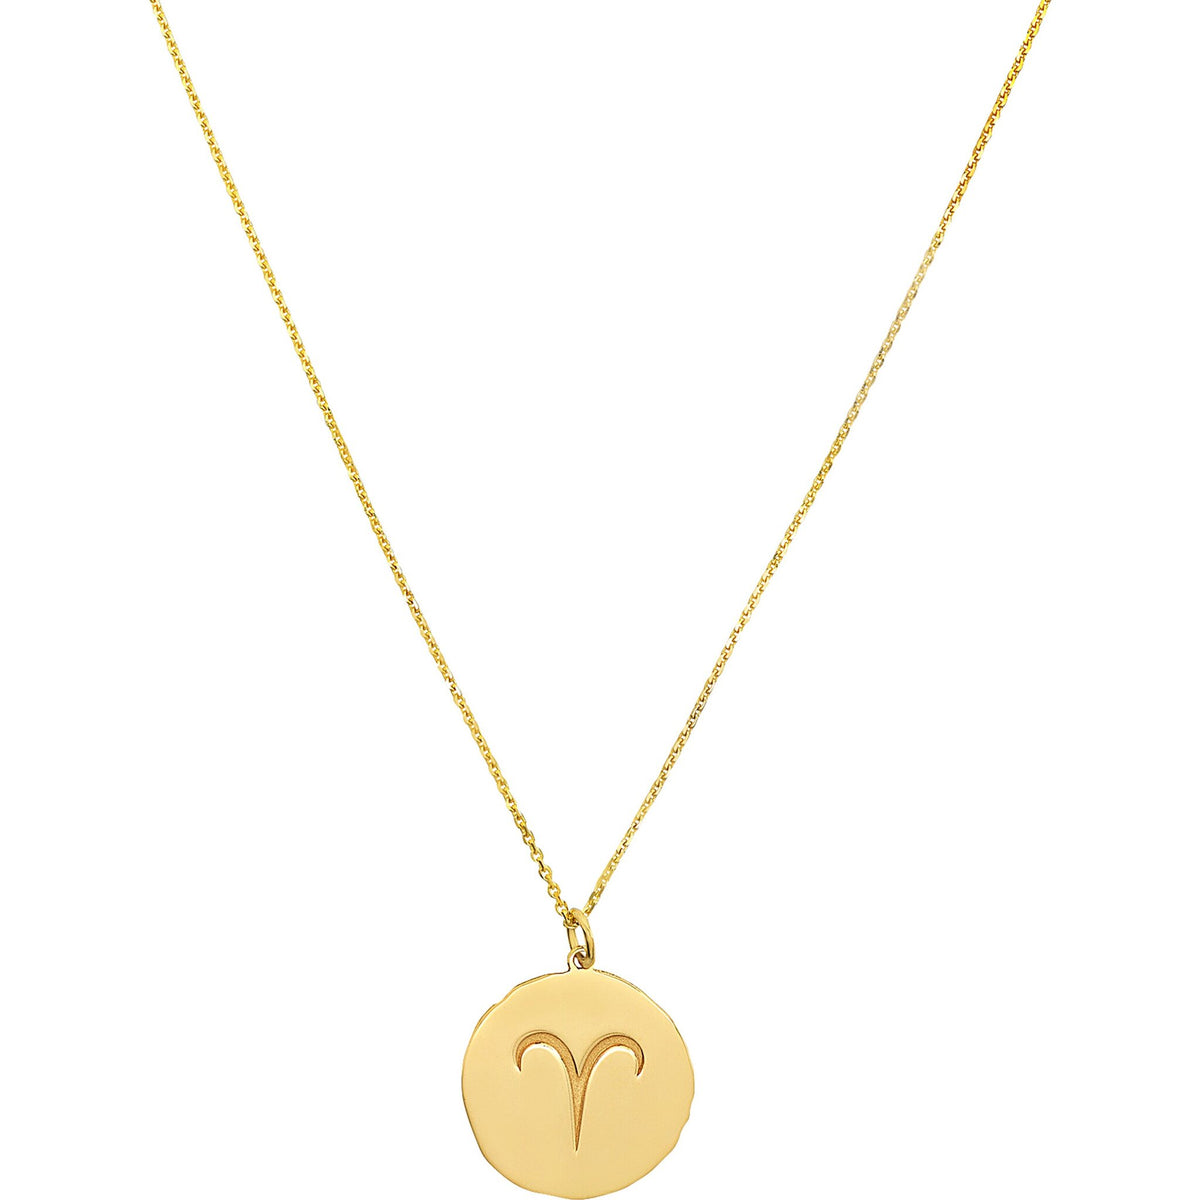 Olas d'Oro 18" Necklace - 14K Yellow Gold Aries Organic Disc Pendant Necklace